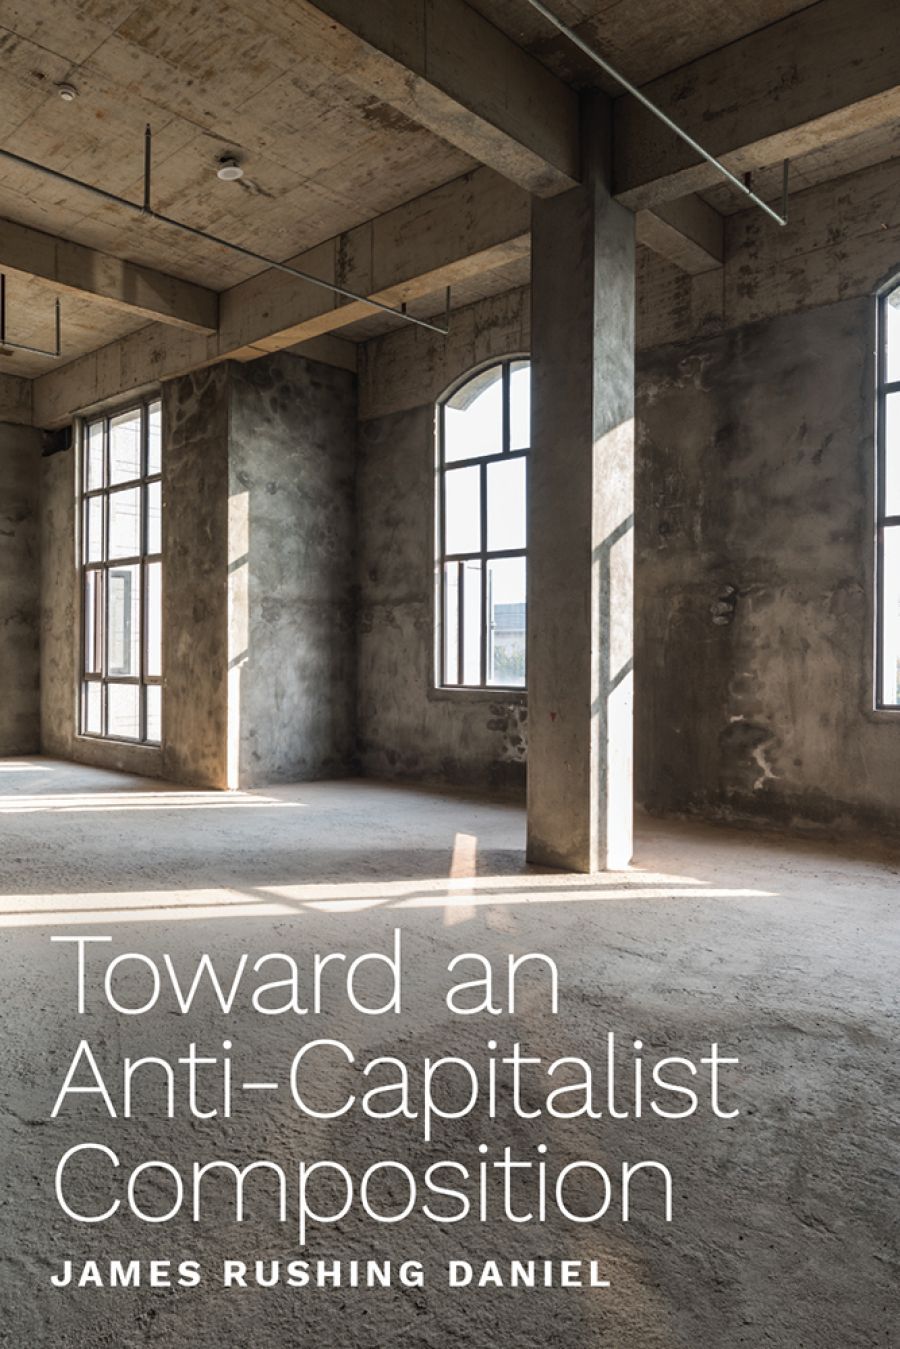 Is It Possible to Teach Anti-Capitalism? On James Rushing Daniel’s “Toward an Anti-Capitalist Composition”